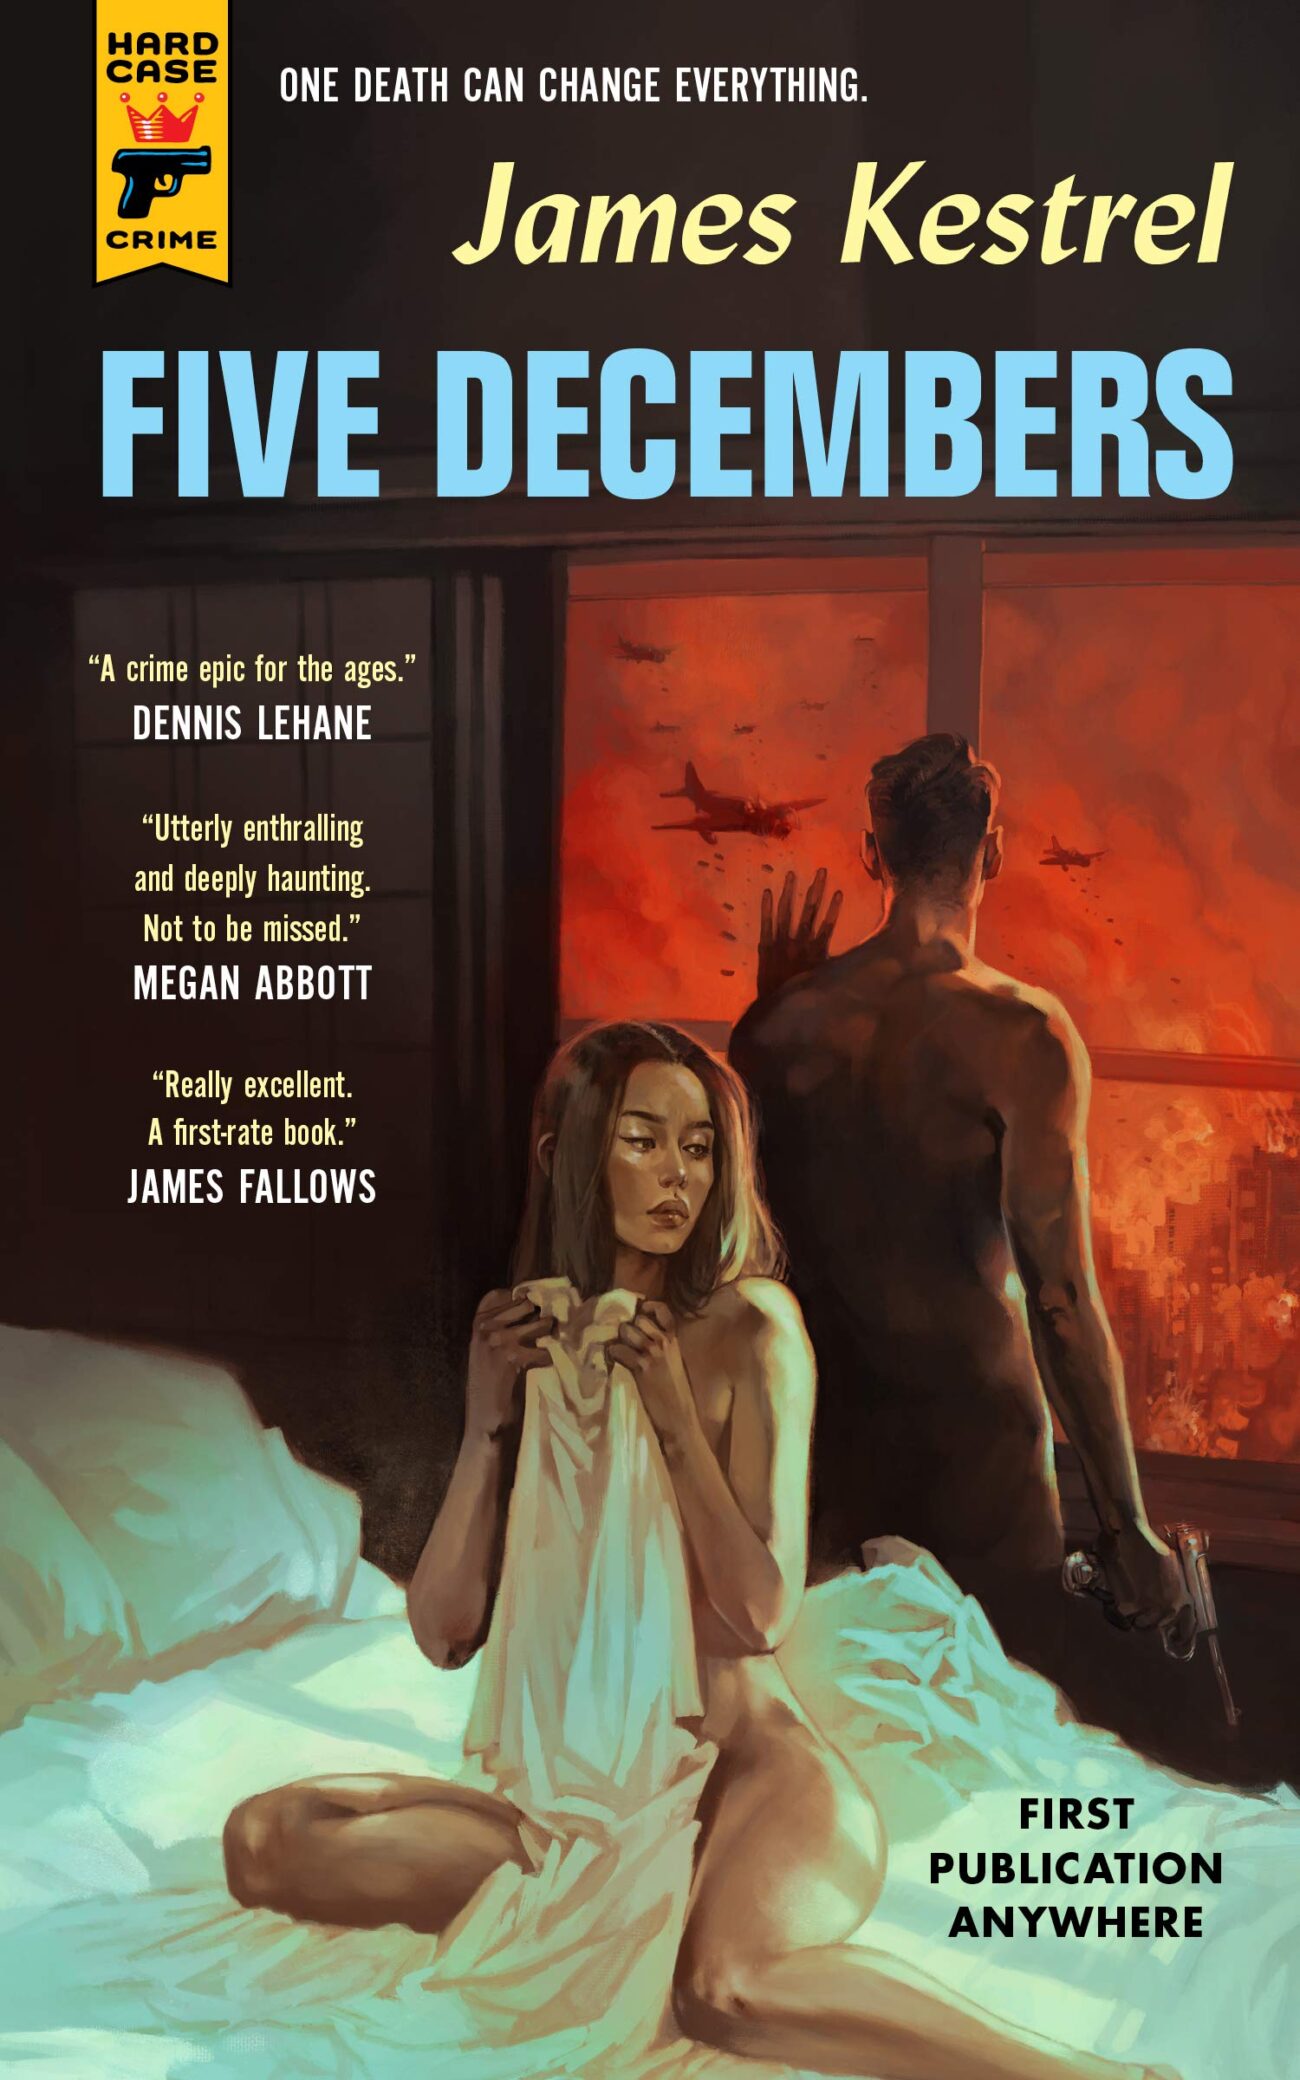 James Kestrel is the author of the new pulp novel 'Five Decembers'. Learn about Kestrel's influences and the novel here.